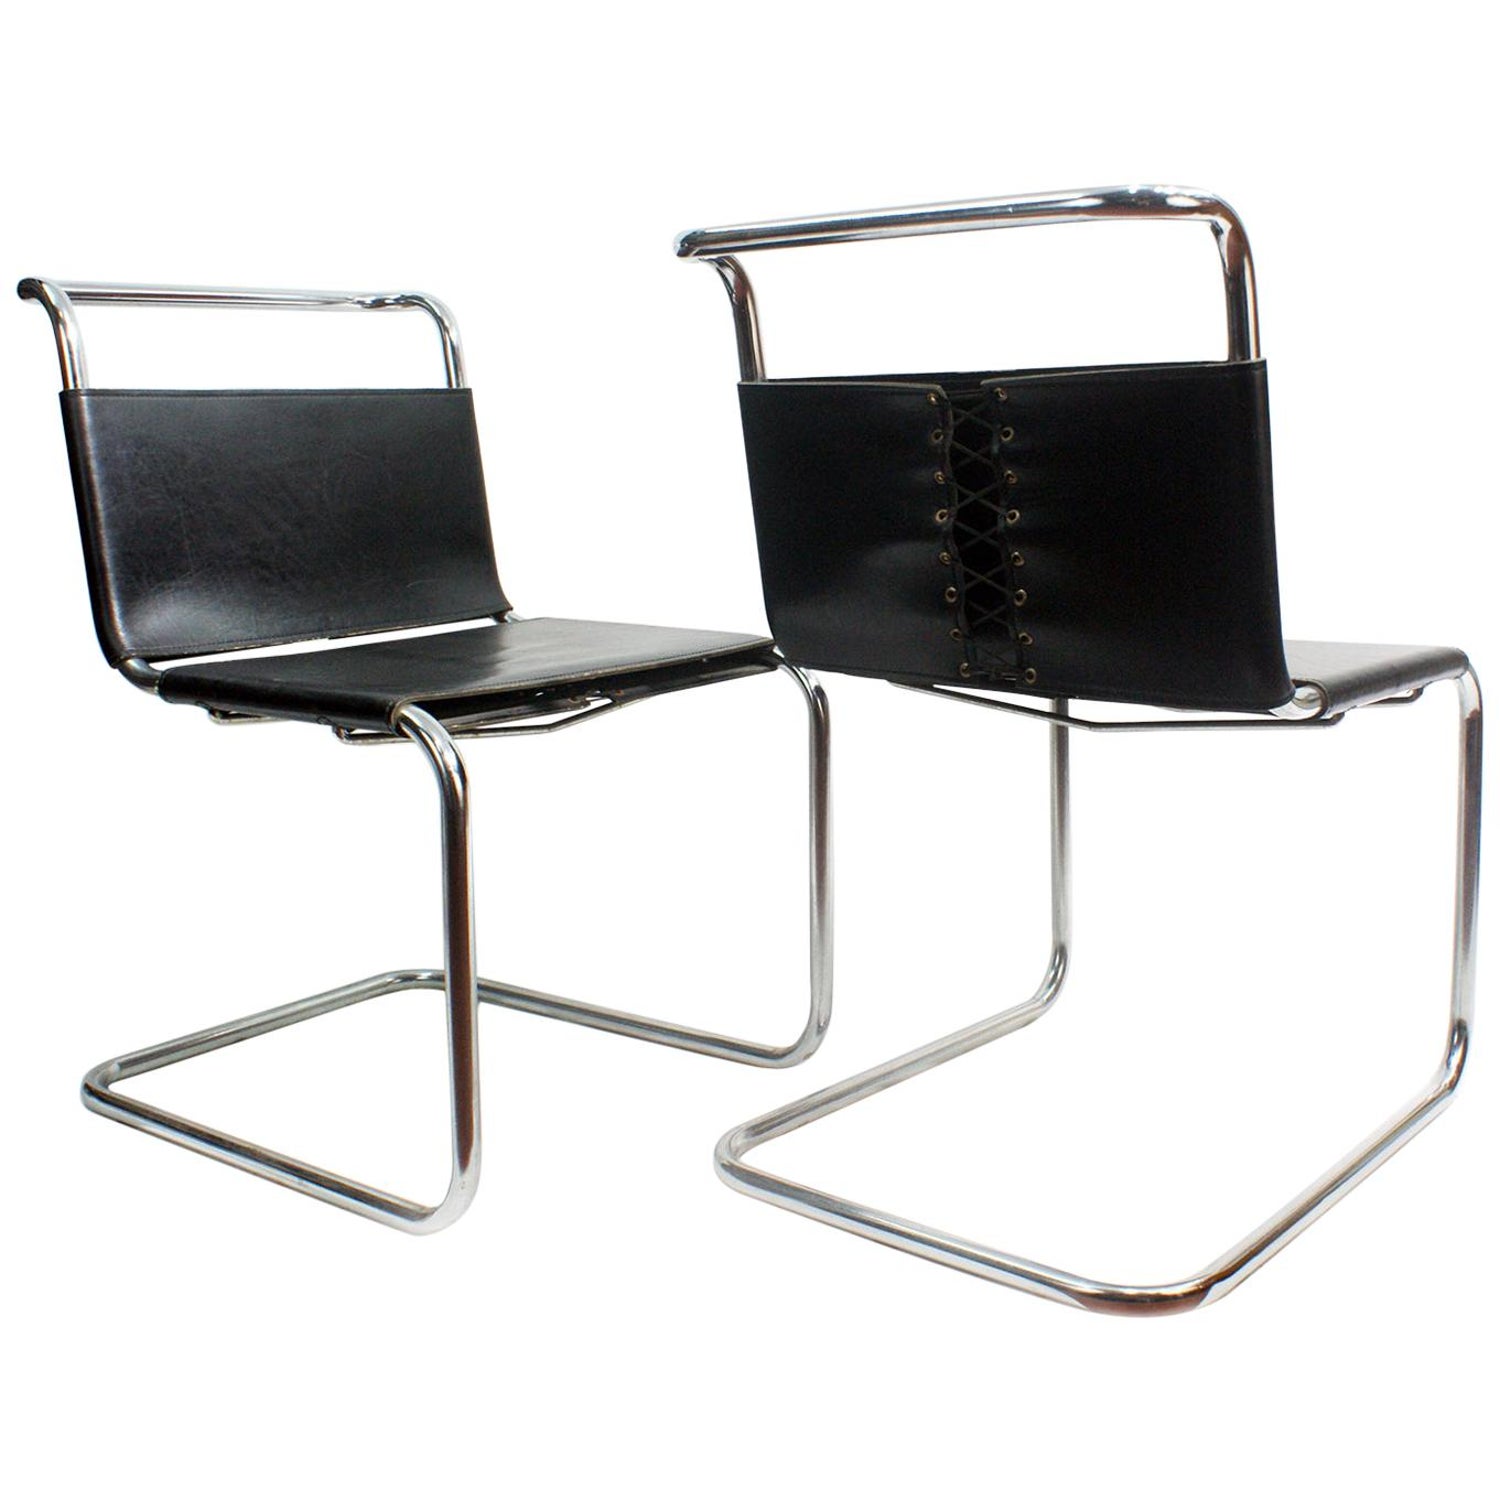 Mies van der Rohe MR10 Sling Lounge Chairs For Sale at 1stDibs | mies  chair, mies van der rohe chair mr10, mies van der rohe mr10 chair